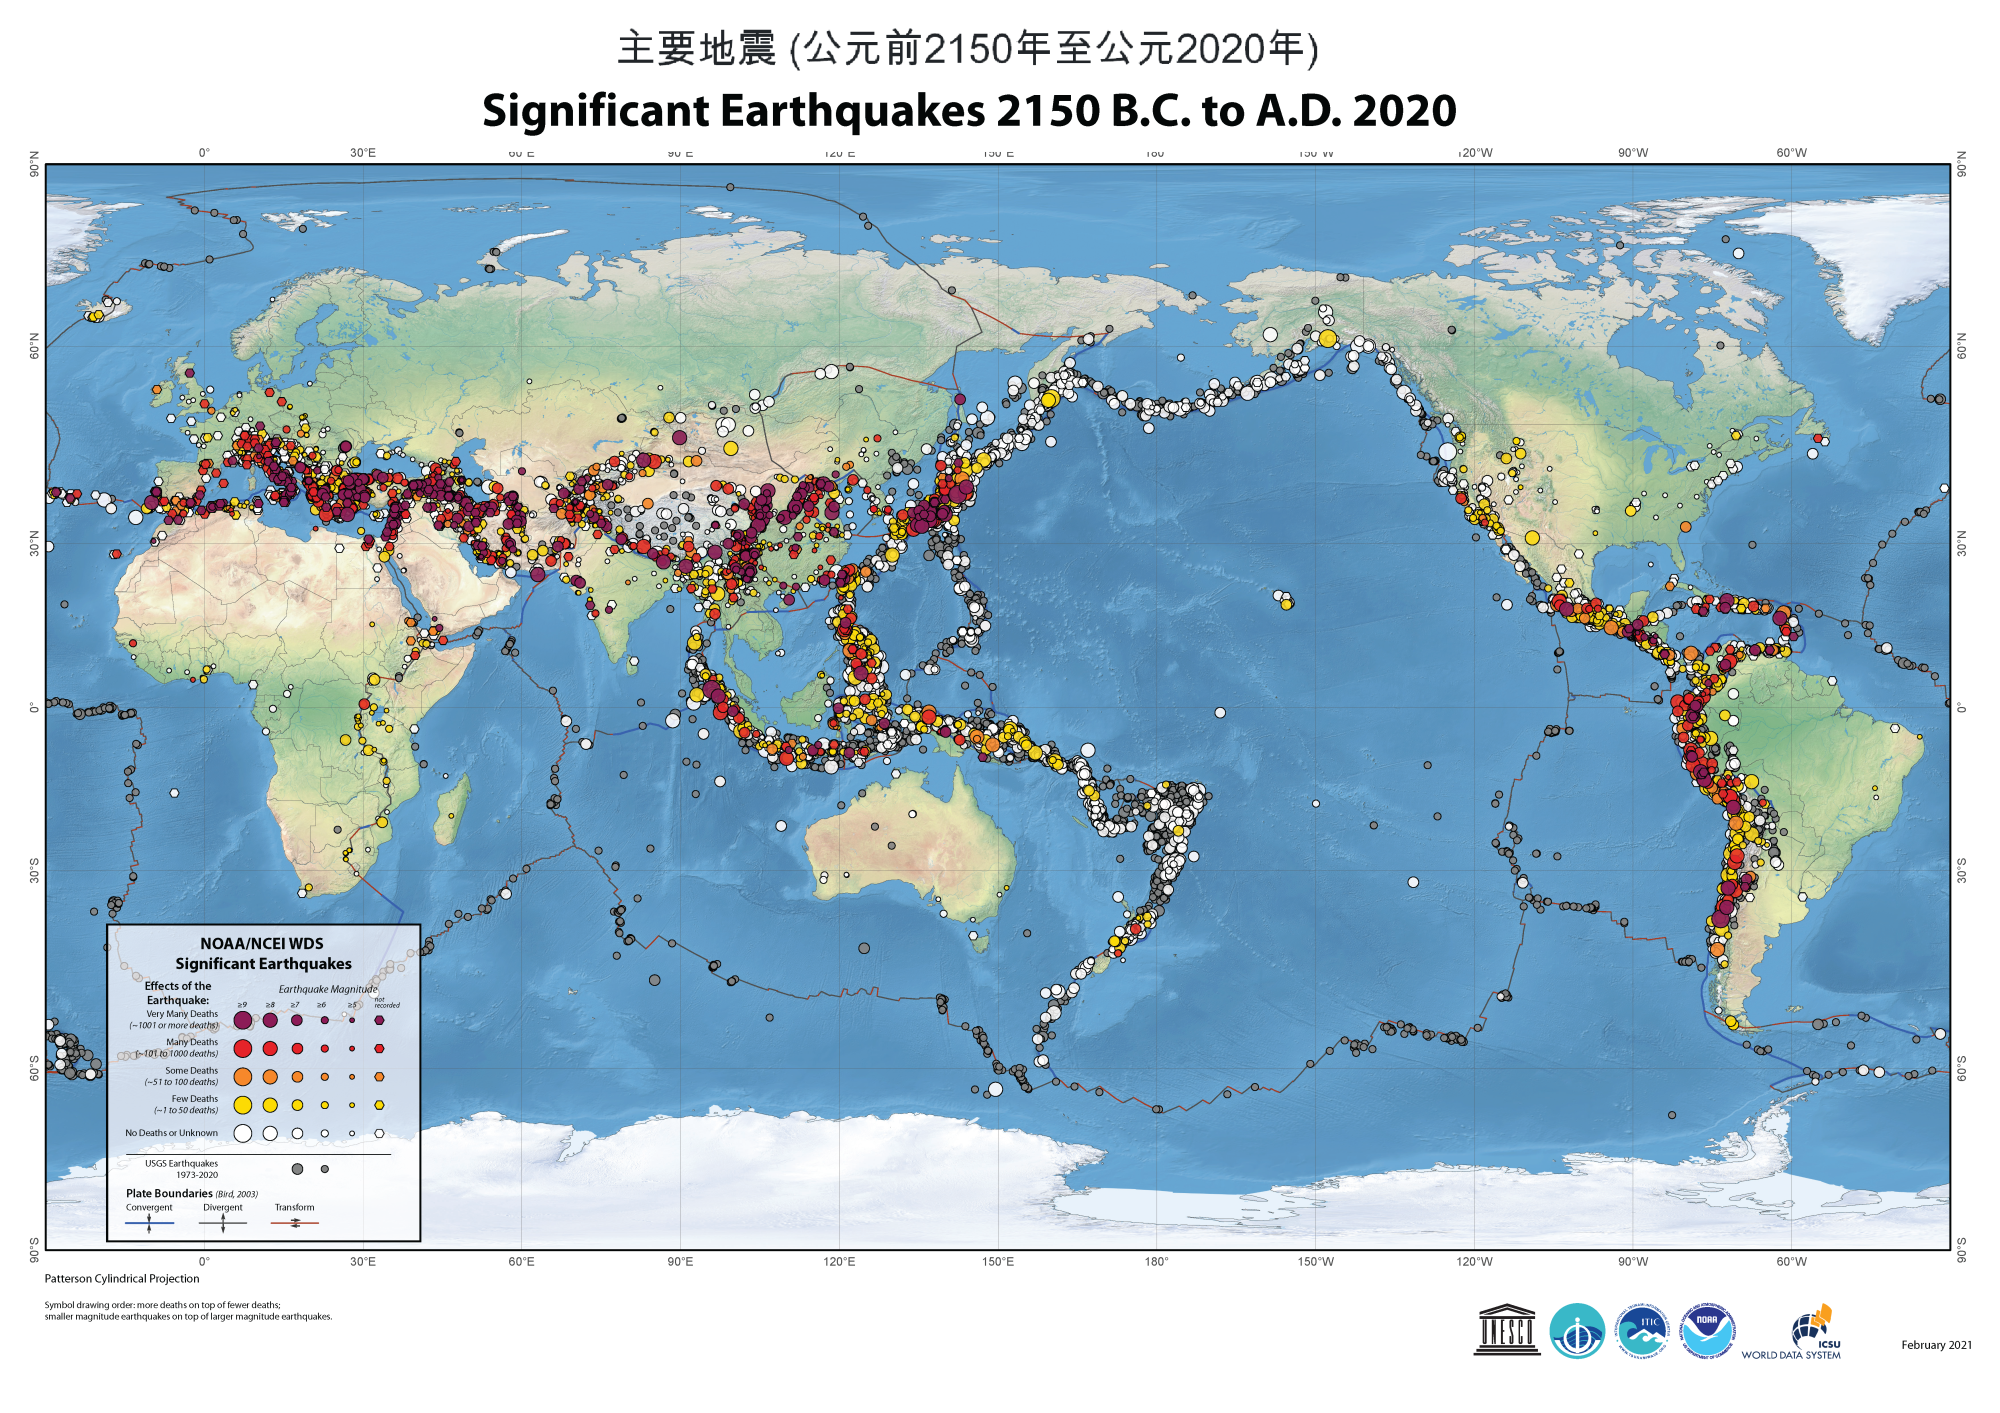 Location of significant earthquakes around the world